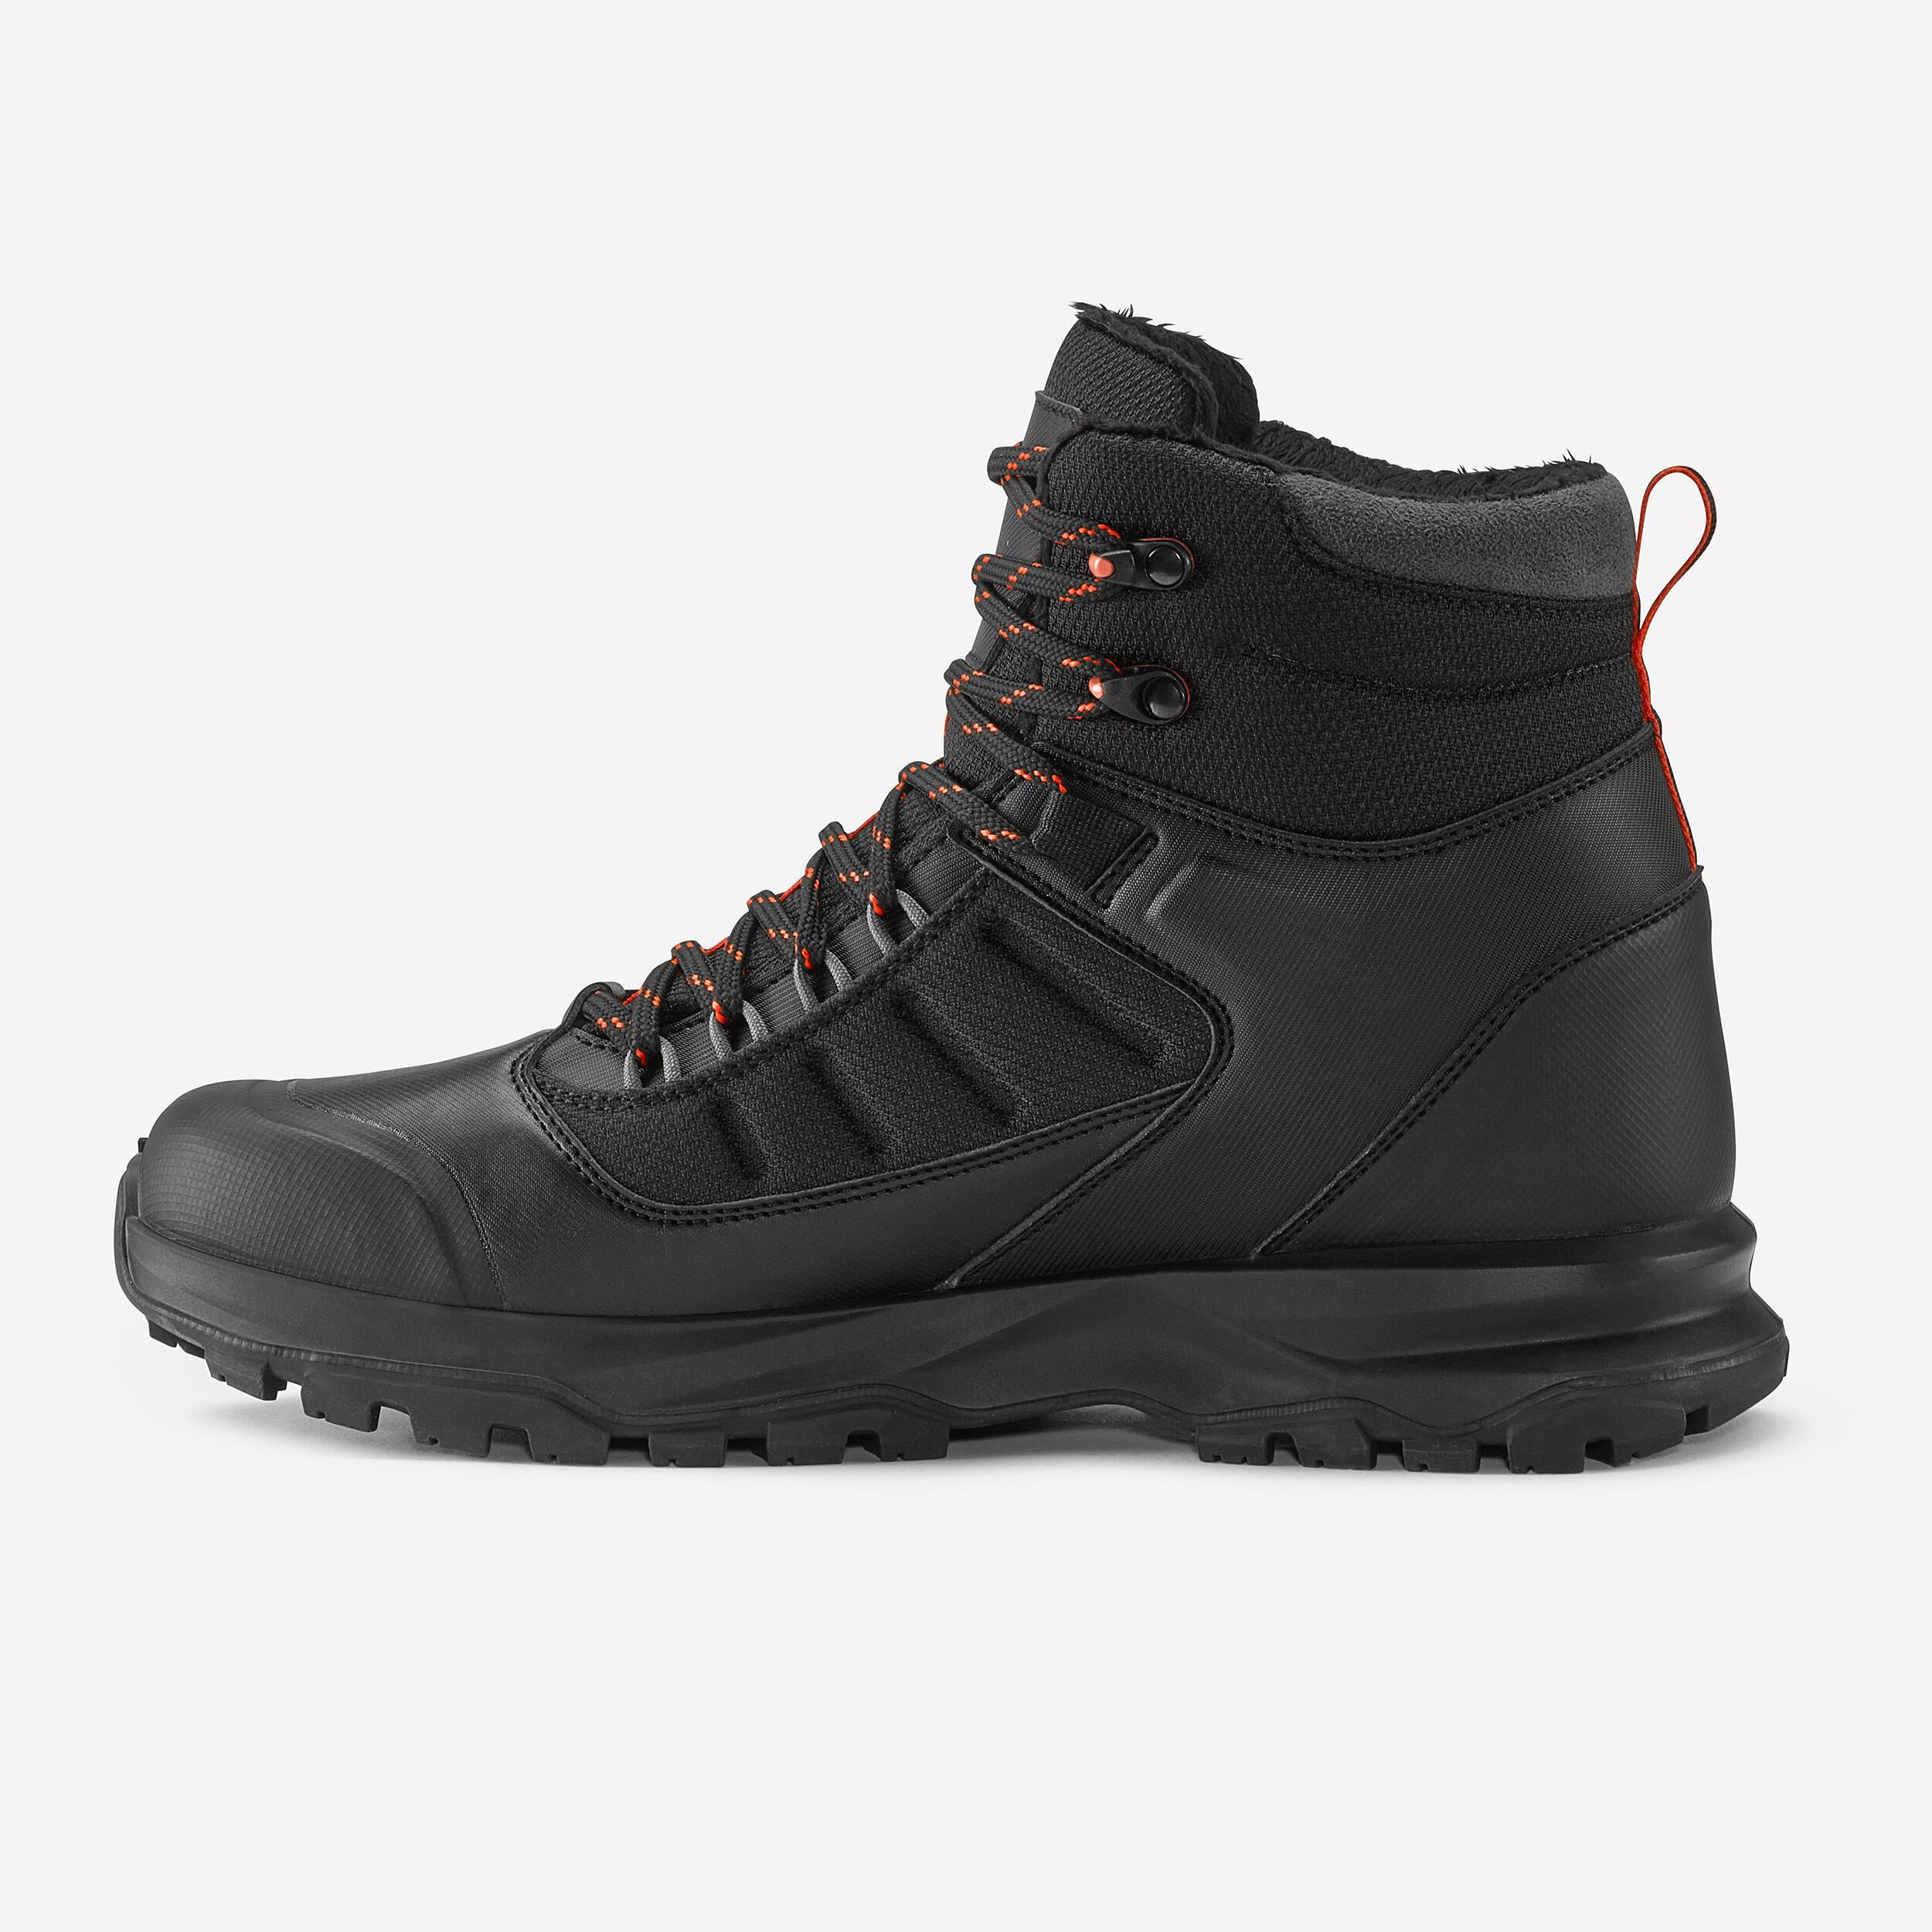 Men’s Warm and Waterproof Hiking Boots - SH500 mountain MID 3/7